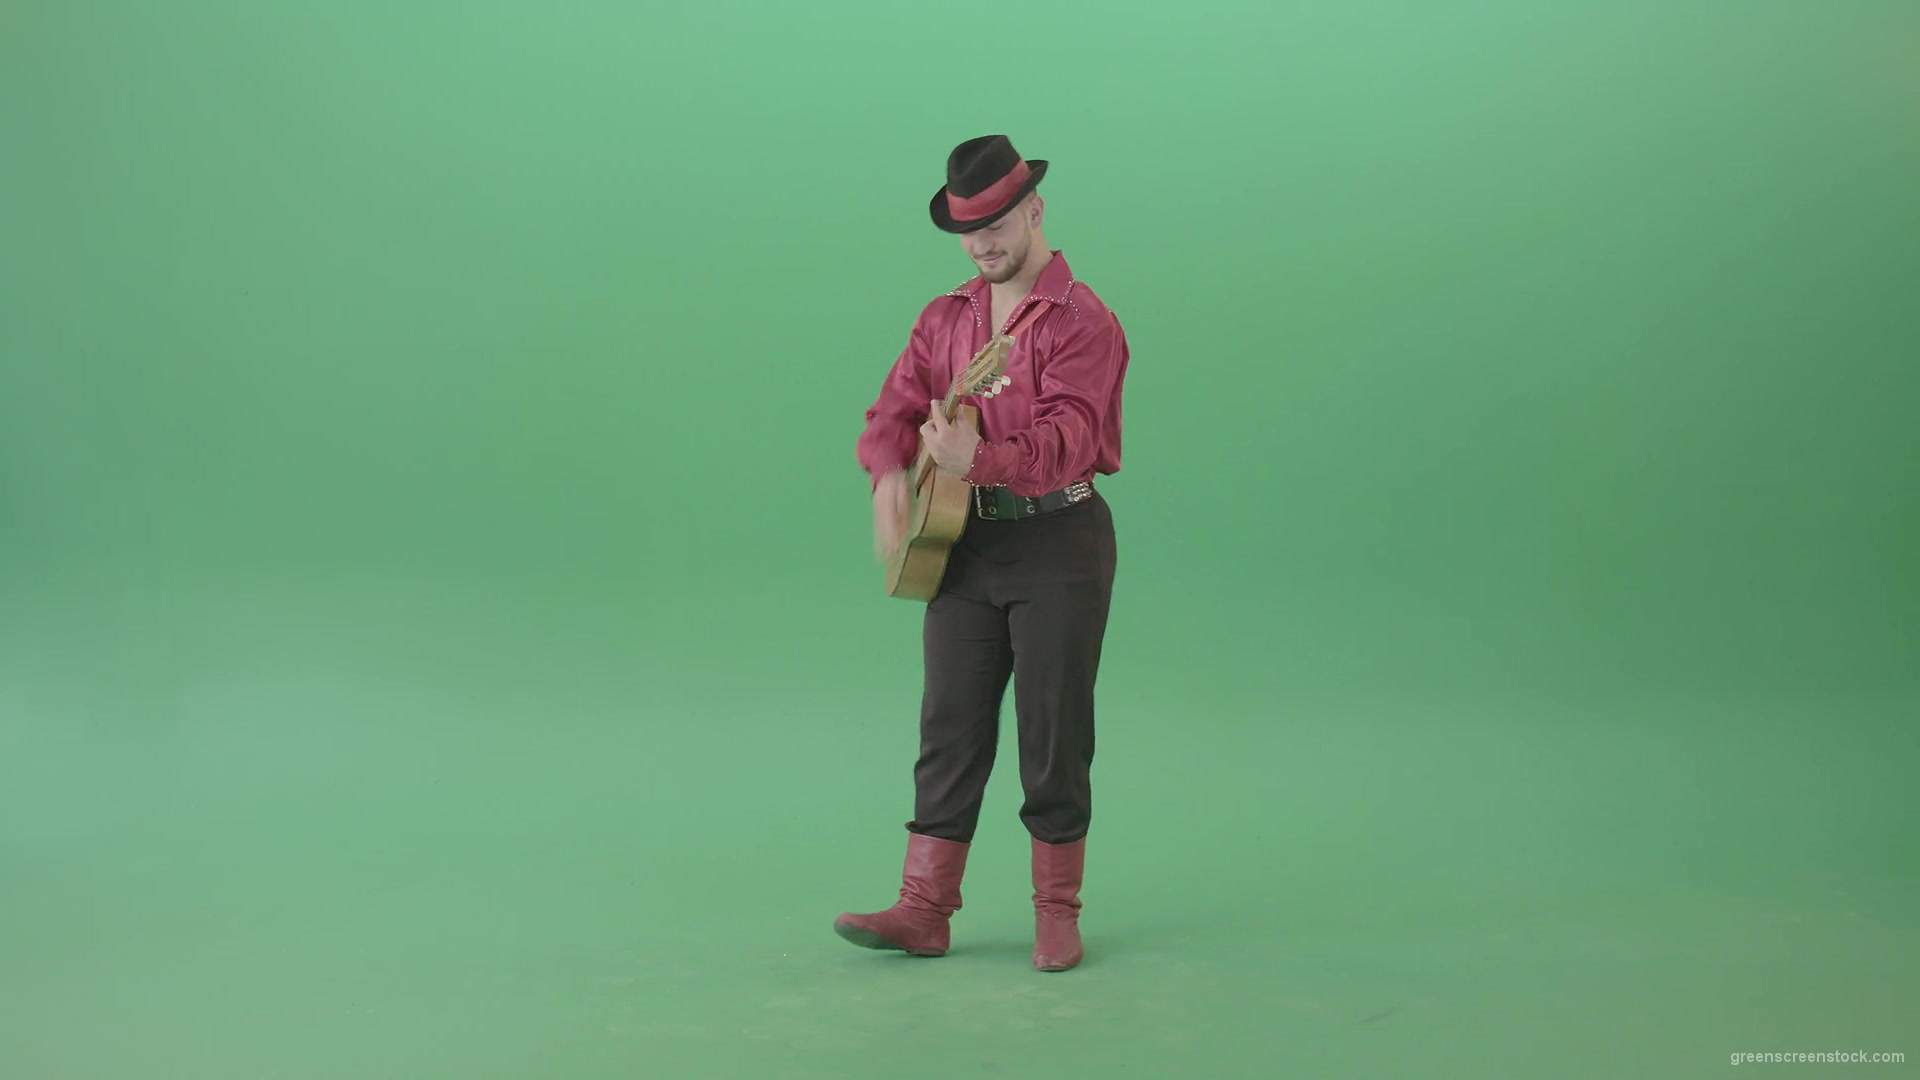 Balkan-Gipsy-man-in-red-shirt-playing-guitar-isolated-on-green-screen-4K-Video-Footage-1920_007 Green Screen Stock